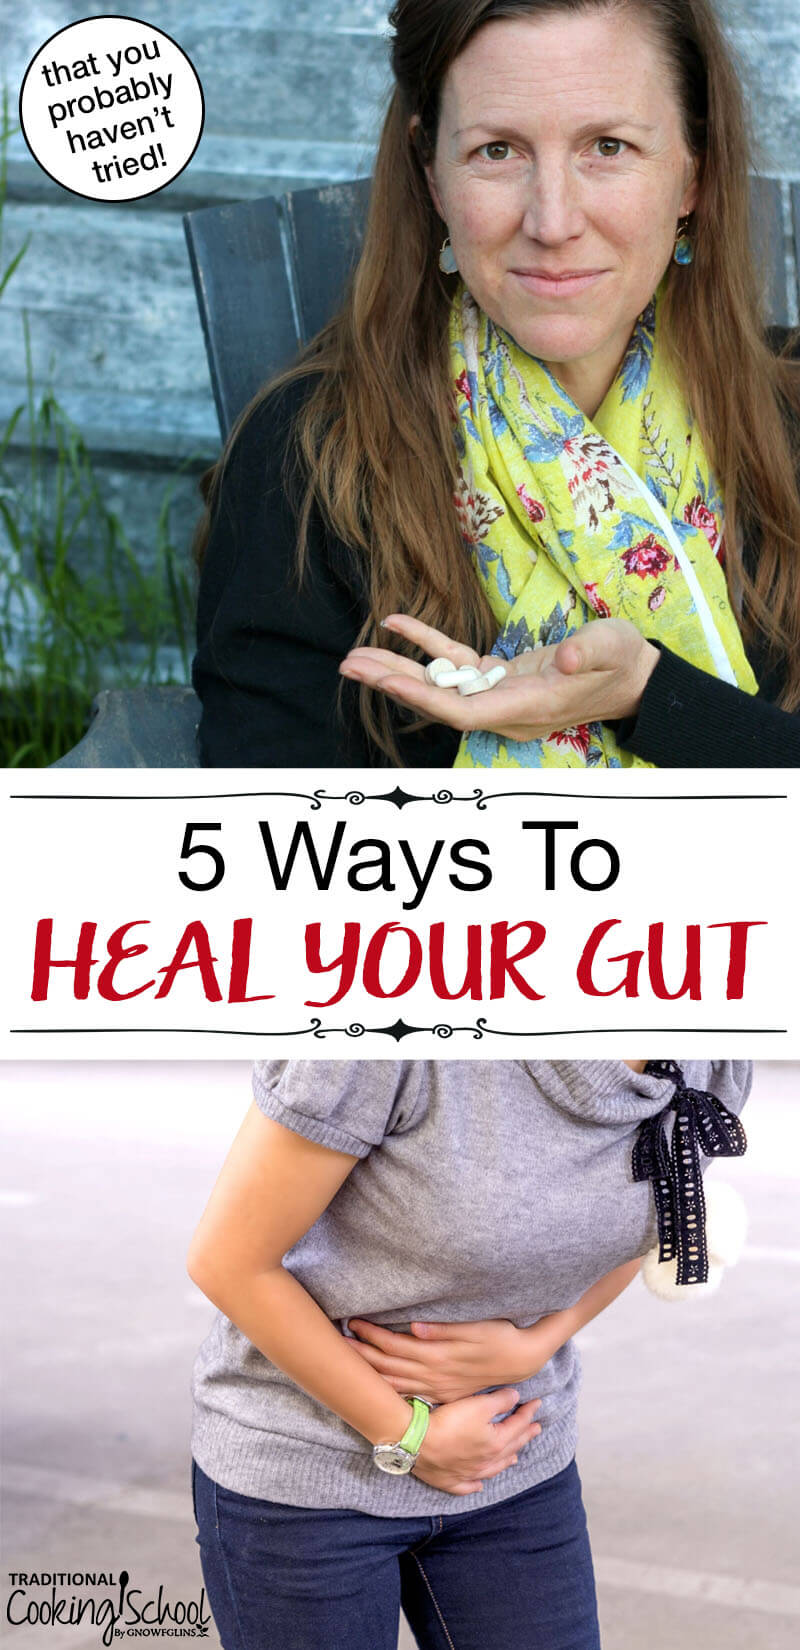 What if you've done a gut-healing diet, incorporated healing recipes and foods like broth, soup, smoothie and stayed perfectly on plan and even took gut healing supplements... and it didn't work? This post explores some of the lesser-known ways to address gut health -- things you probably haven't tried yet! And bonus! 2 of these practical remedies are FREE! #guthealth #healing #recipes #diet #supplements #protocol